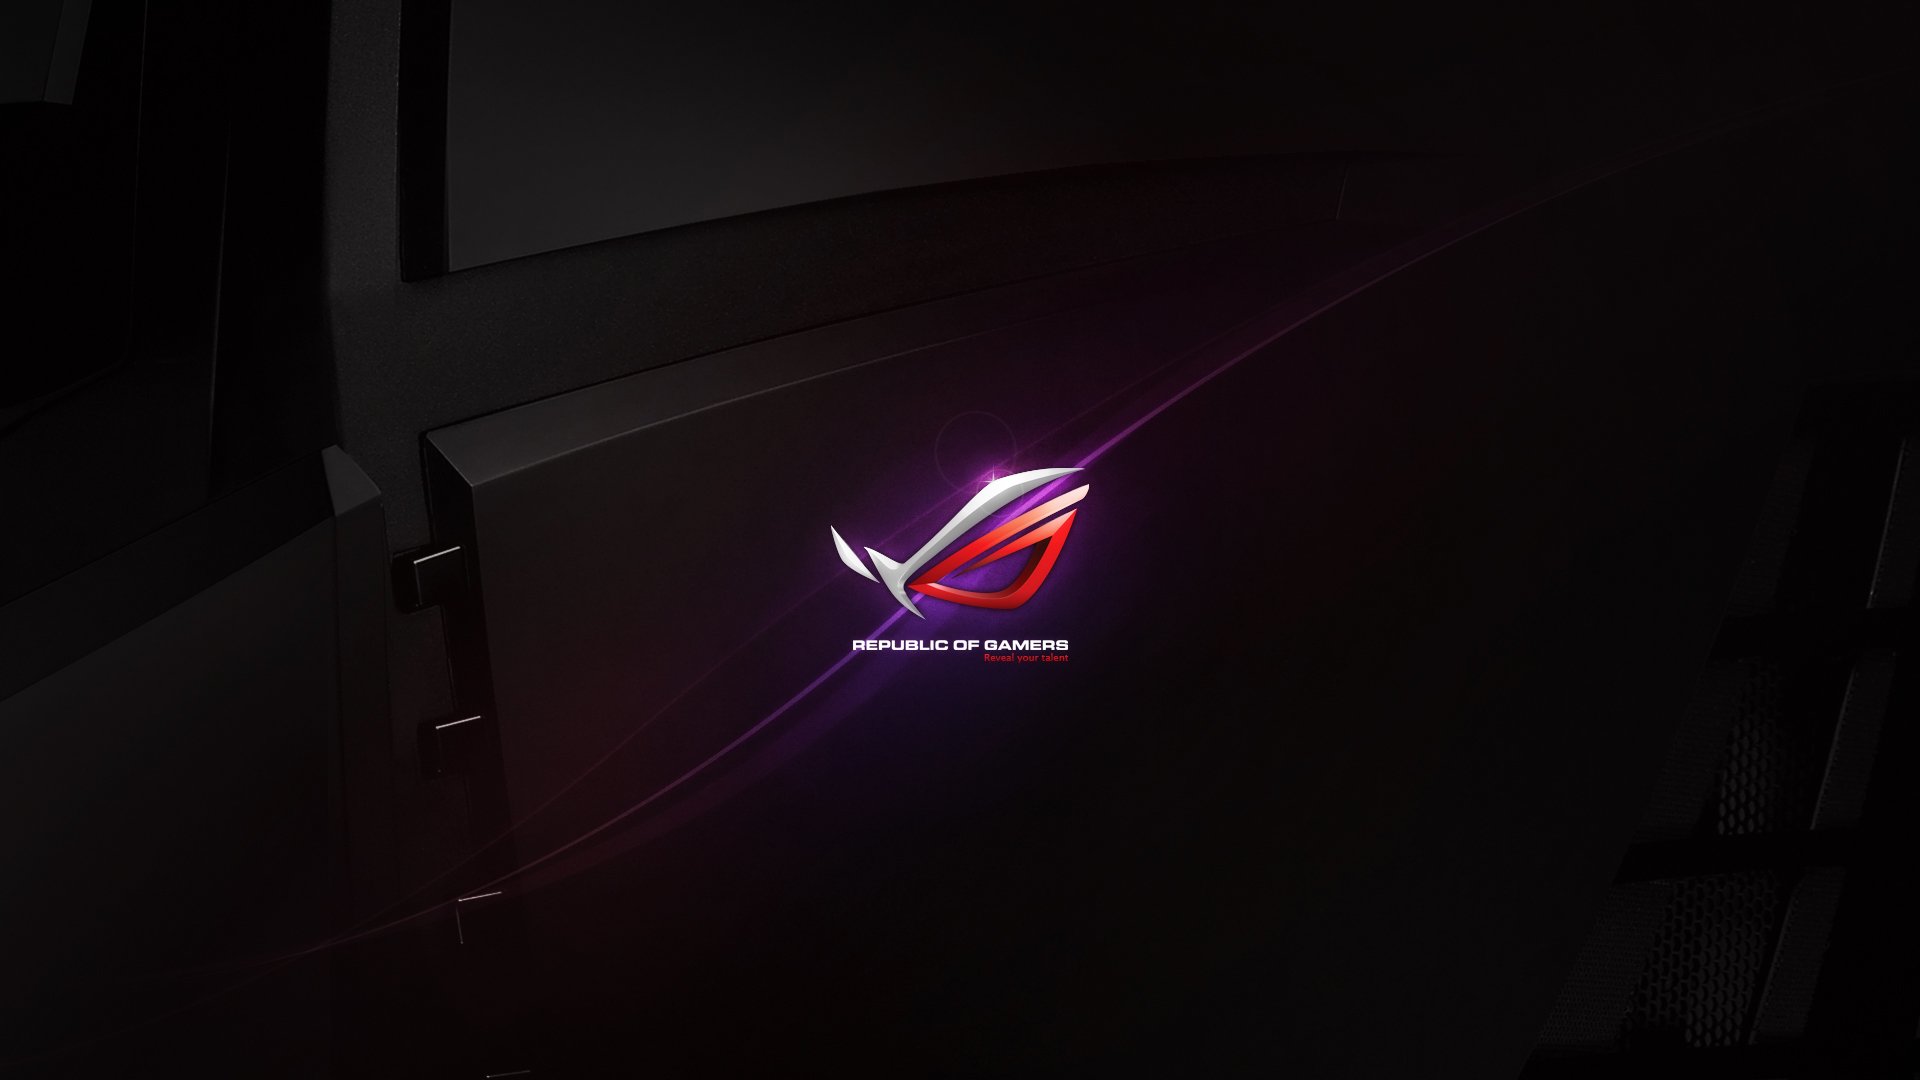 ASUS REPUBLIC GAMERS computer game wallpaper background 1920x1080